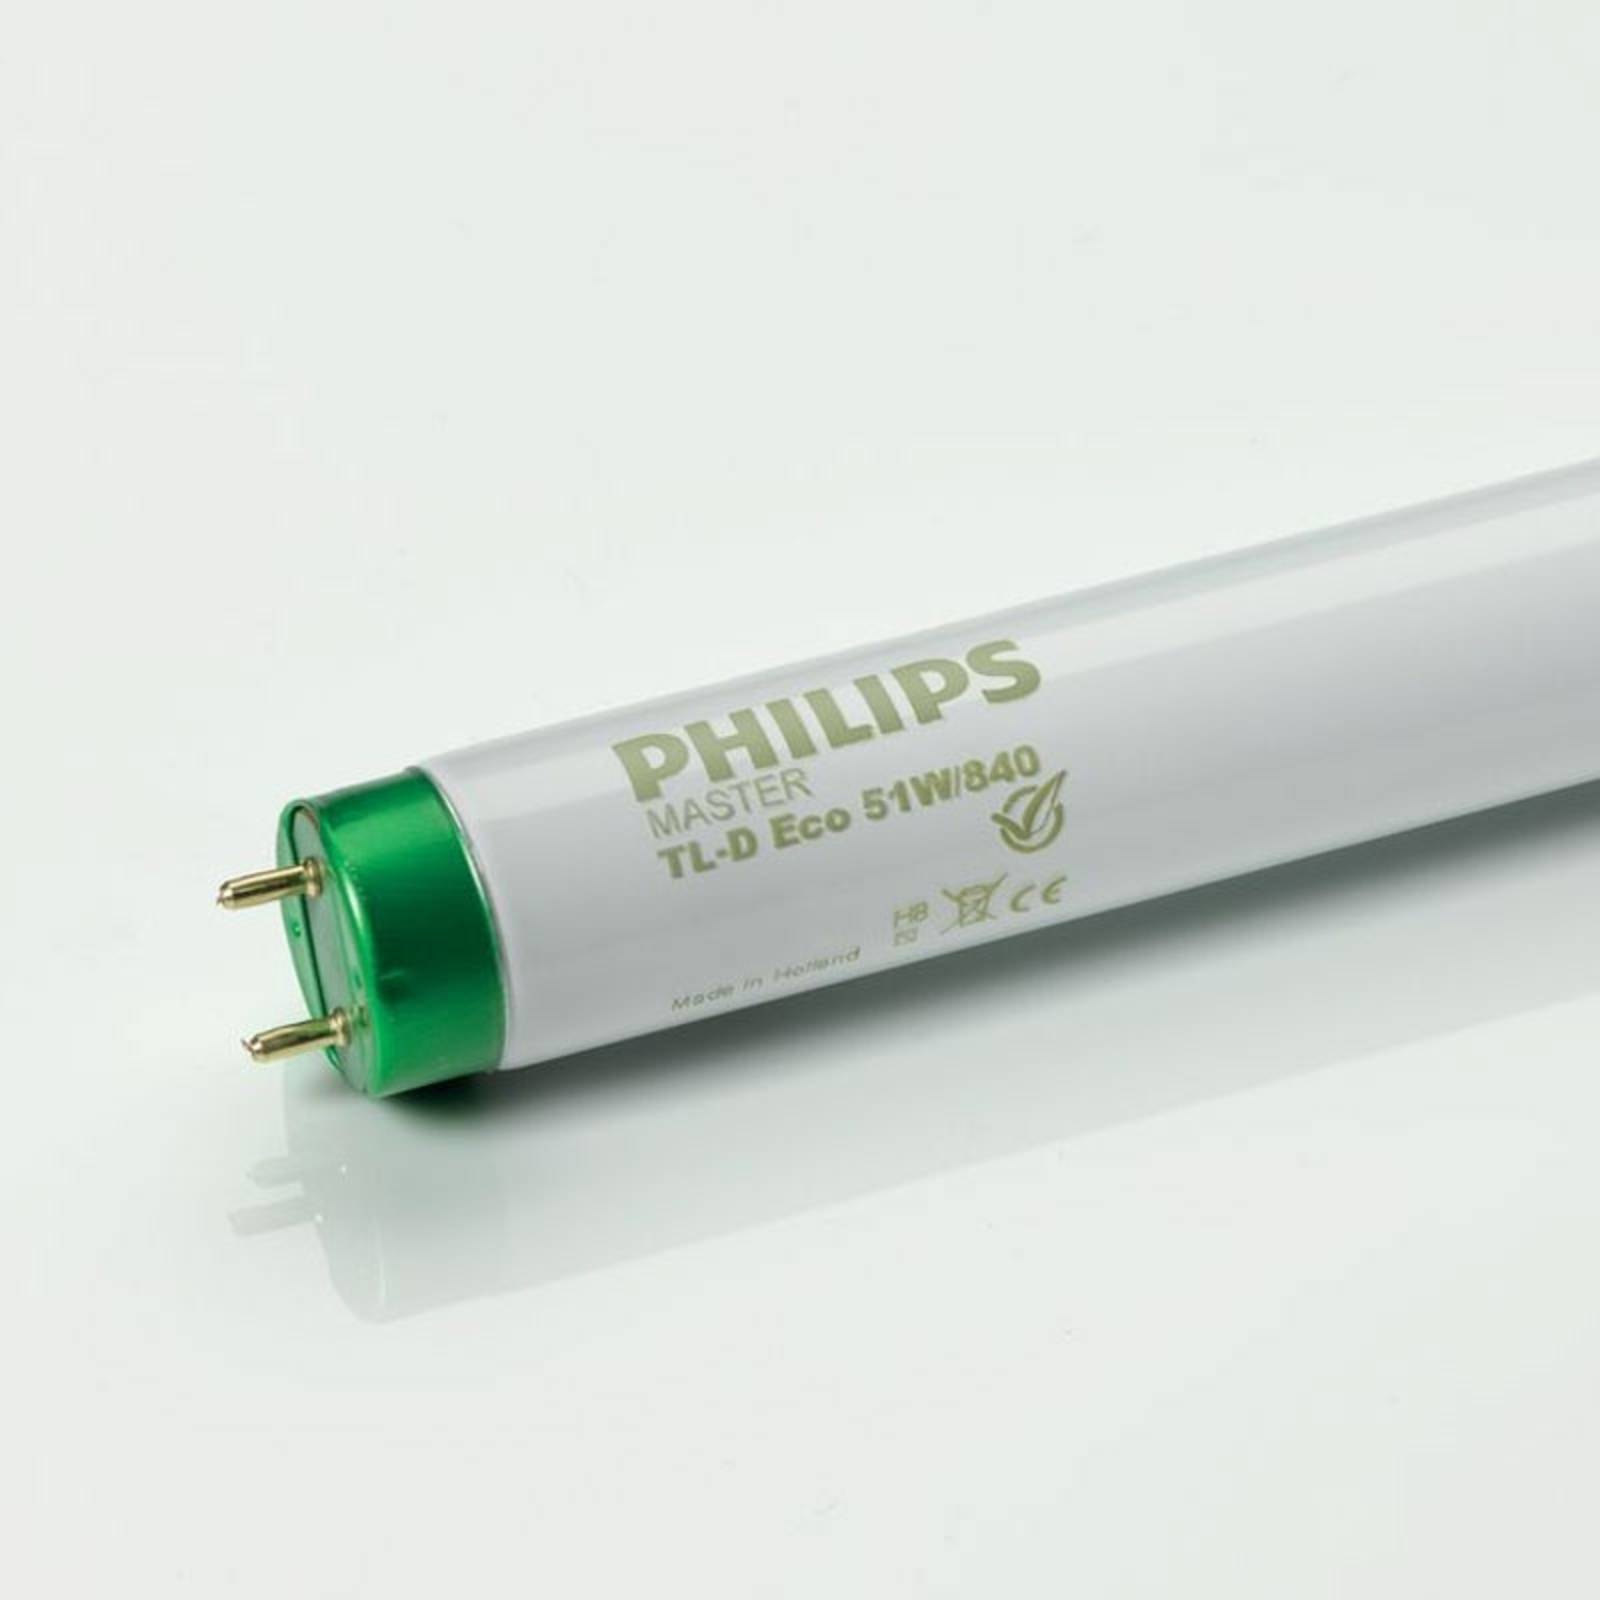 Philips G13 T8 51W 840 Master TL-D Eco